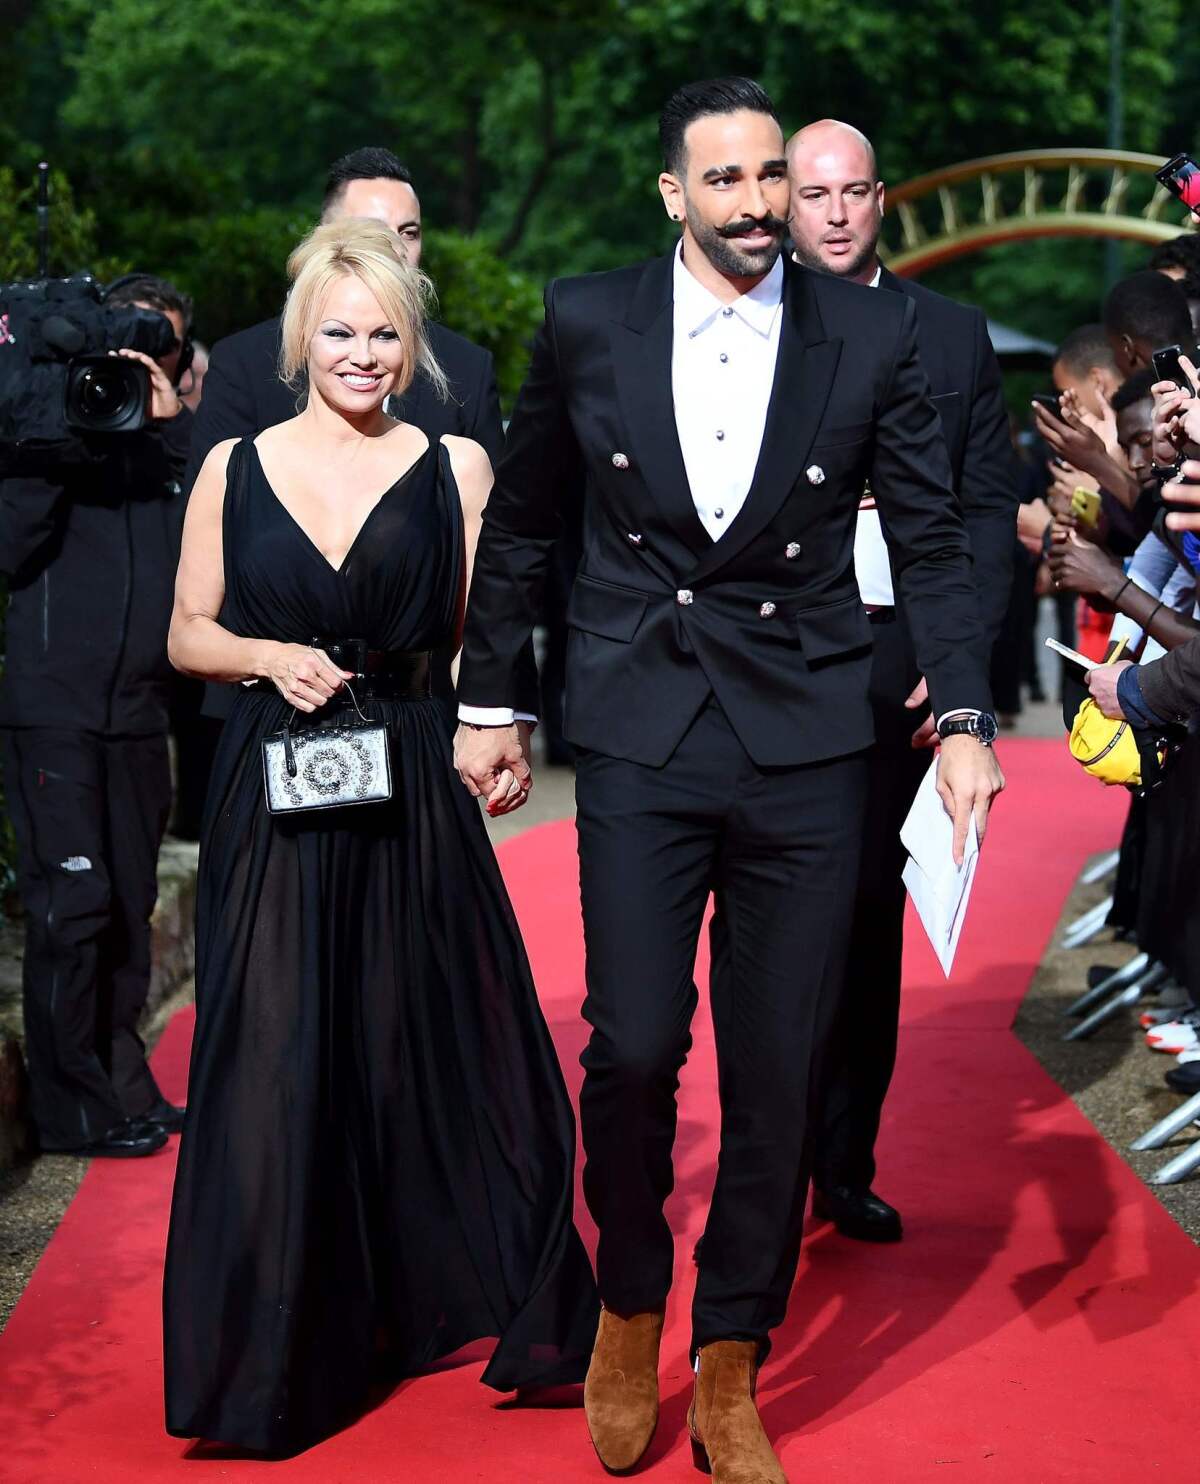 Pamela Anderson with her boyfriend, soccer player Adil Rami, arrive for a TV show taping in Paris on May 19, 2019.